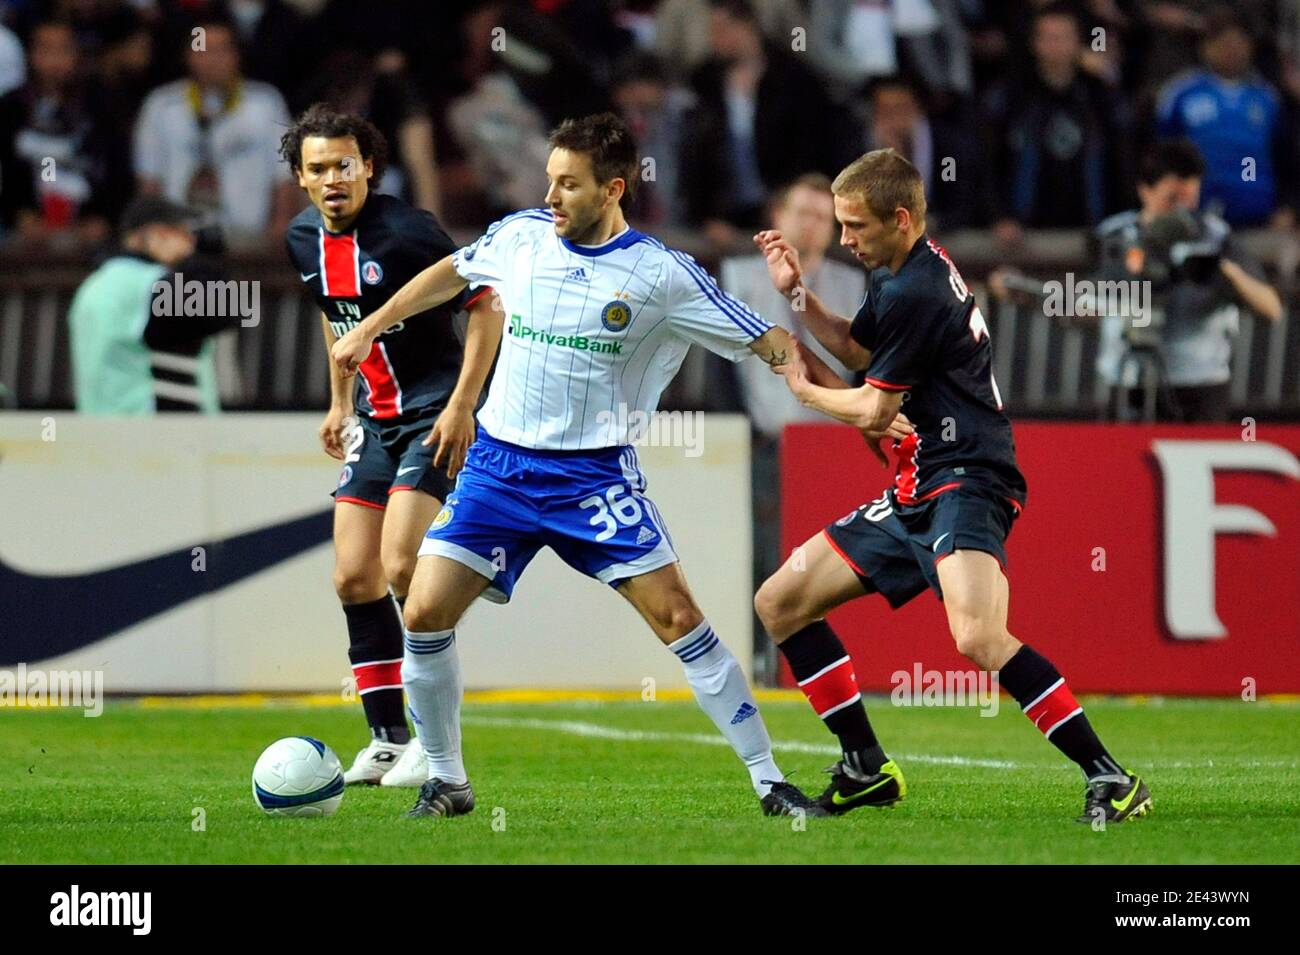 Clement Chantome of Paris Saint Germain fights for the ball with Milos Ninkovic of Dynamo Kyiv during the UEFA Cup quarter-finals match played in Parc des Princes stadium, Paris, France, 9 April 2009. Photo by Stephane Reix/ABACAPRESS.COM Stock Photo